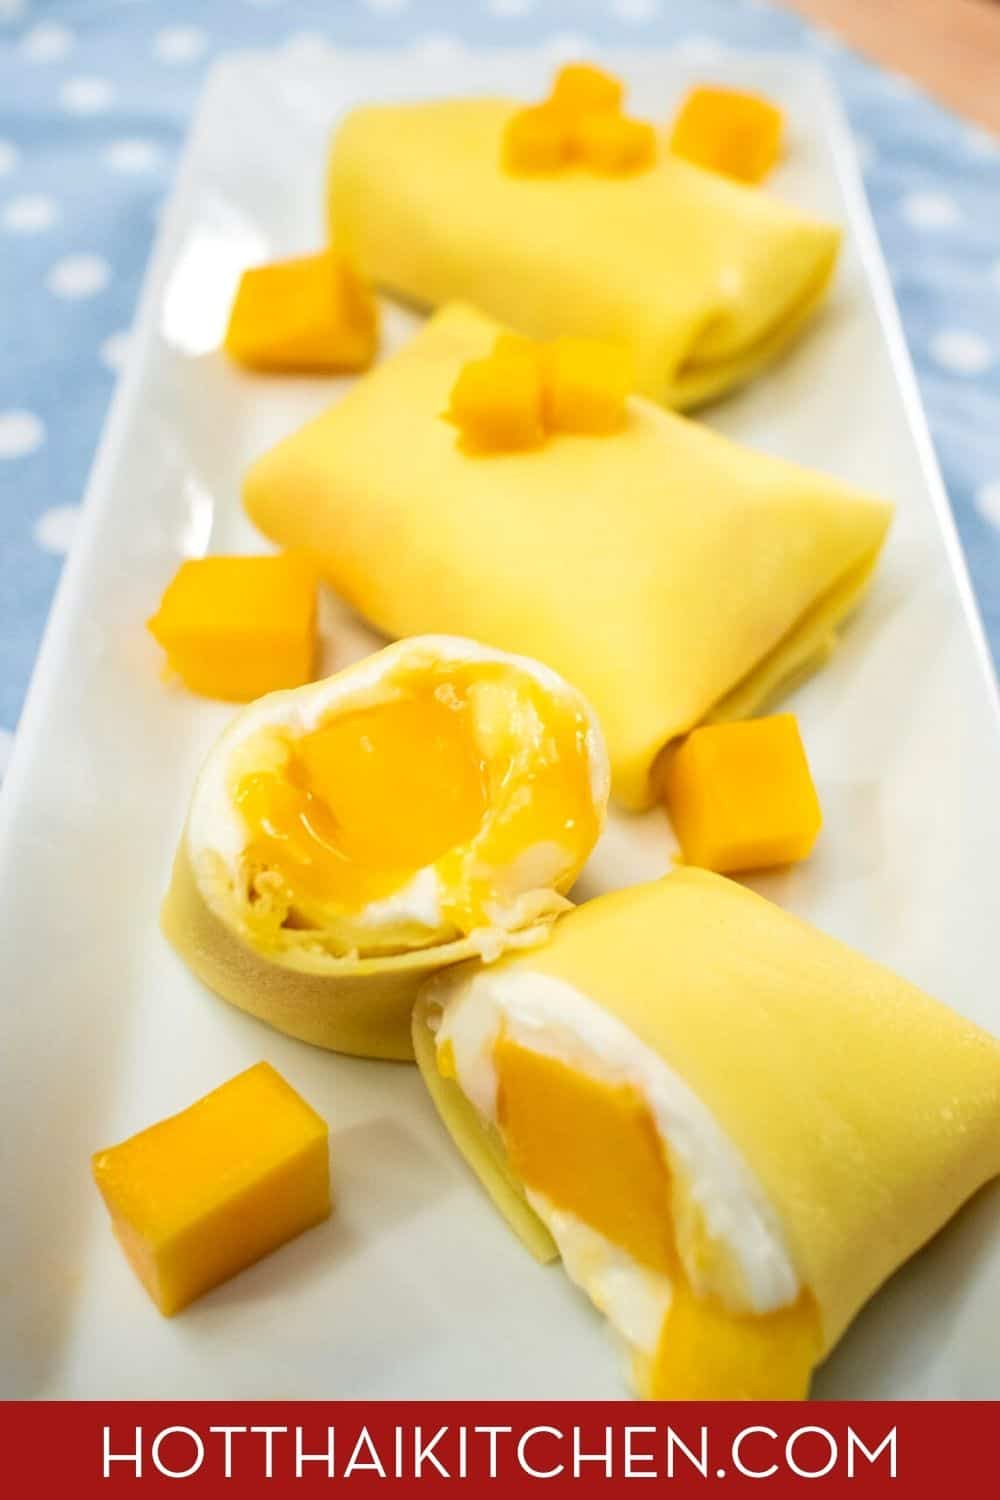 Pinterest friendly image of Hong Kong mango pancakes and mango cubes on a white plate. With hot-thai-kitchen.com text on the bottom.